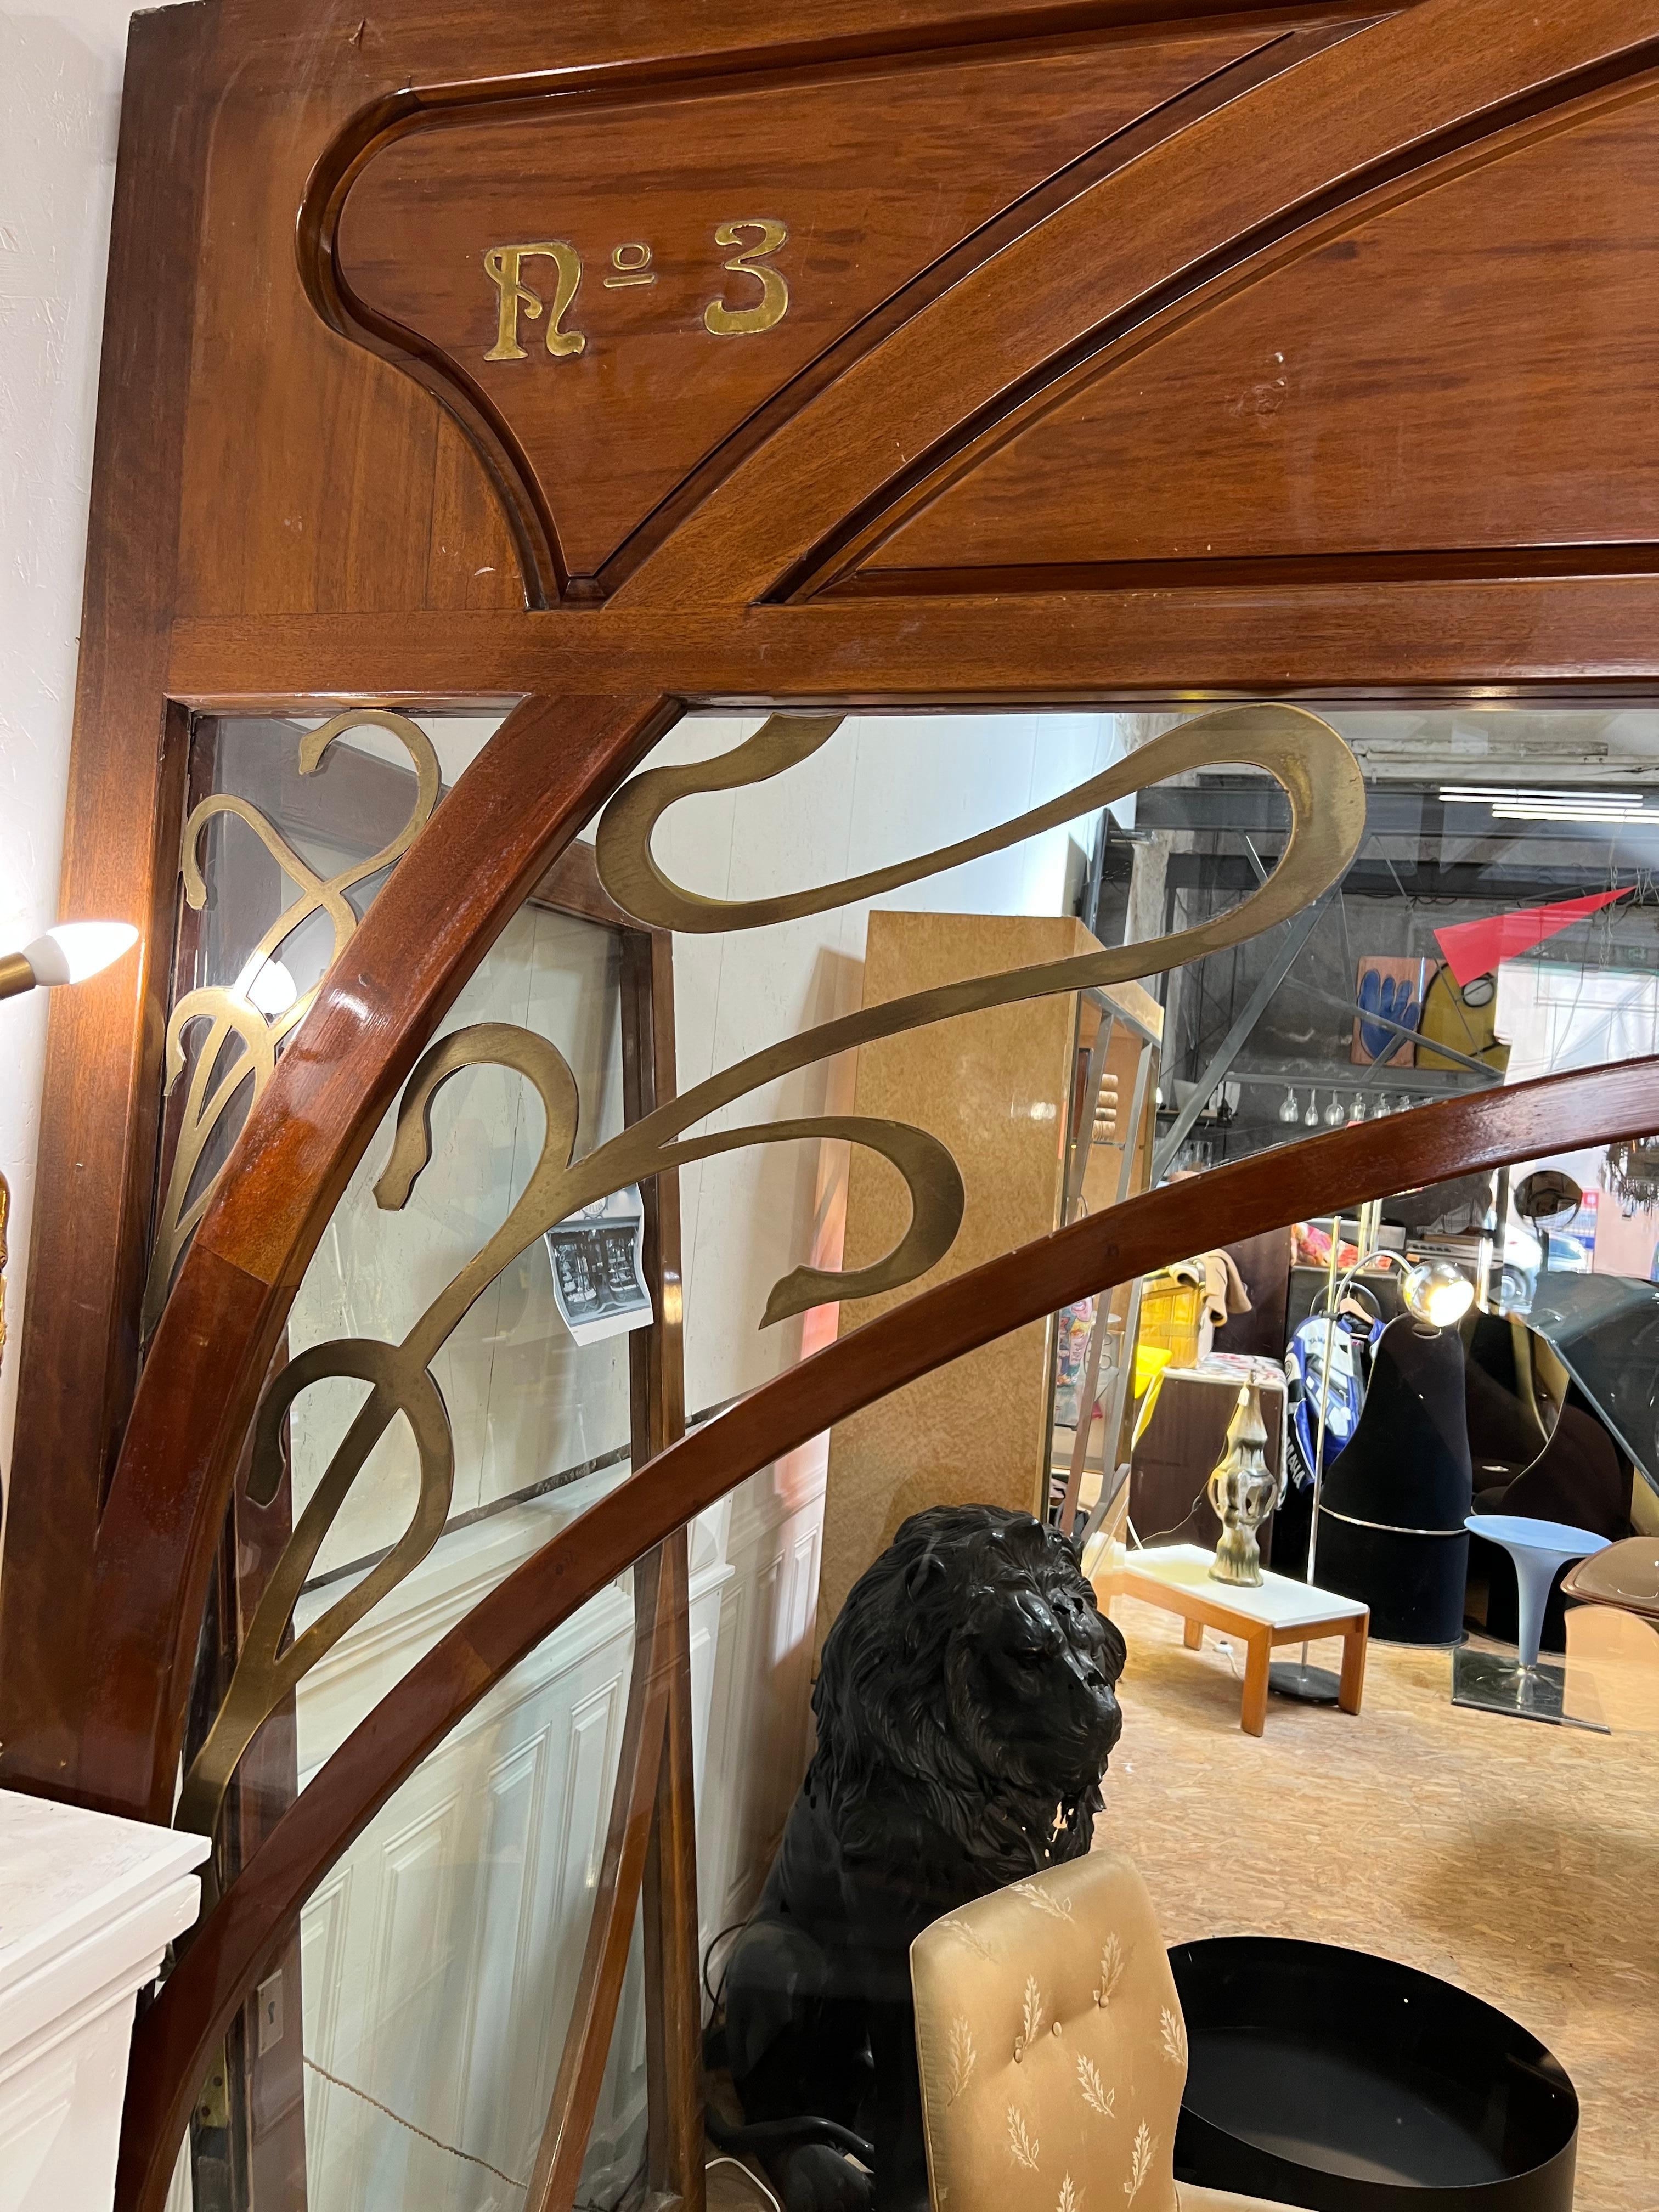 exceptional mahogany art nouveau shop facade
it was created in 1886 for a Spanish pastry shop
the glasses are curved and encrusted with art nouveau elements in brass
the original photos are in the photo folder

there is the possibility of